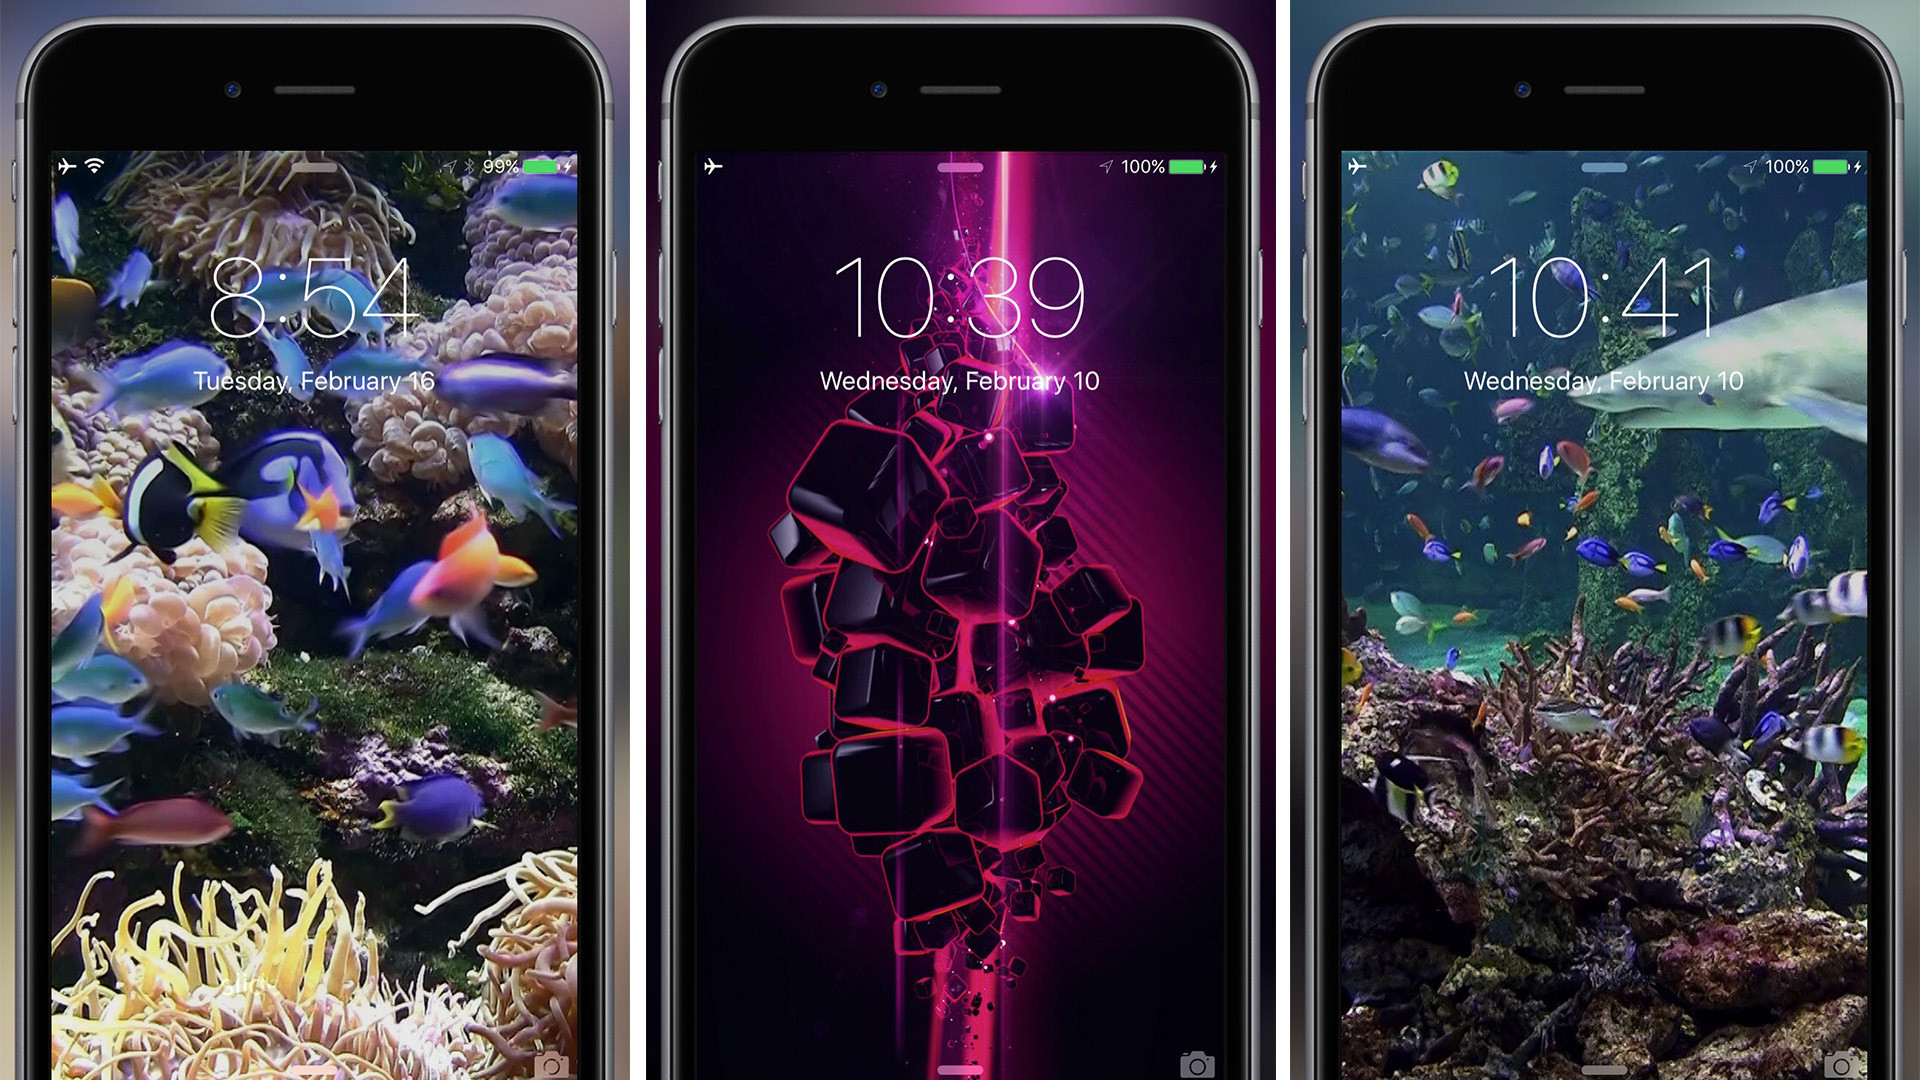 Best Live Wallpaper Apps For Iphone X, Iphone 8, And - Live Wallpaper For  Iphone X - 1920x1080 Wallpaper 